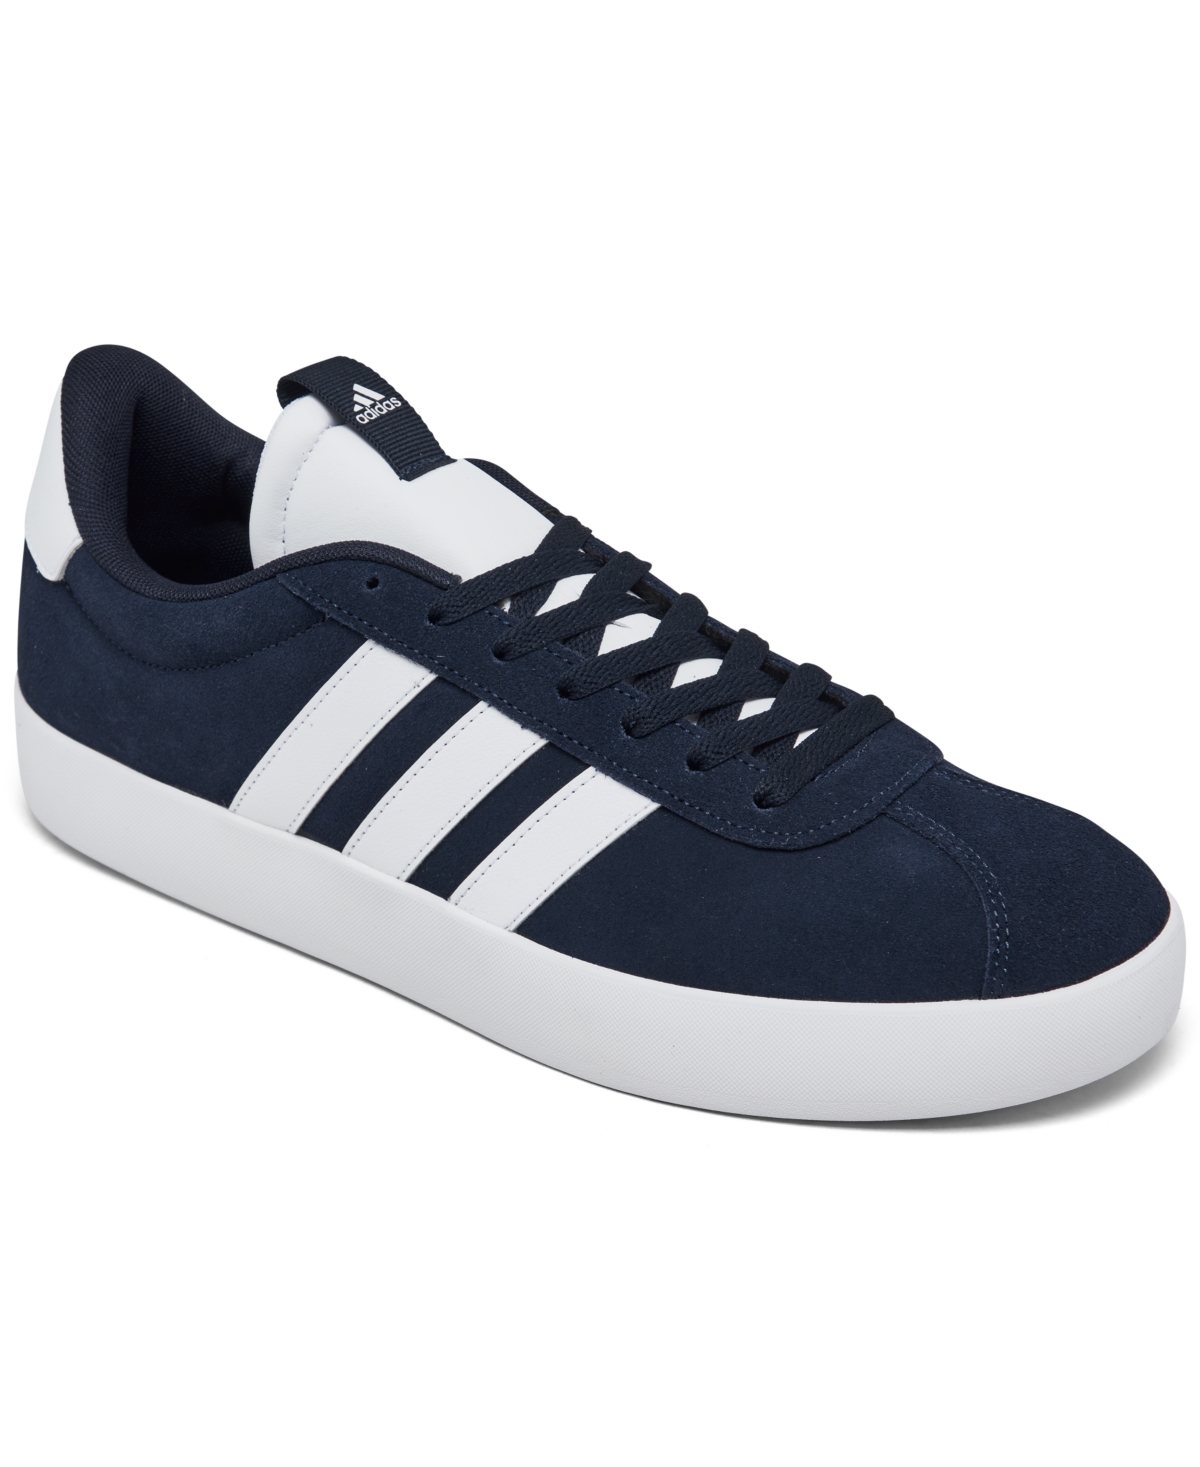 Adidas Originals Men's Vl Court 3.0 Casual Sneakers From Finish Line In Legend Ink,white